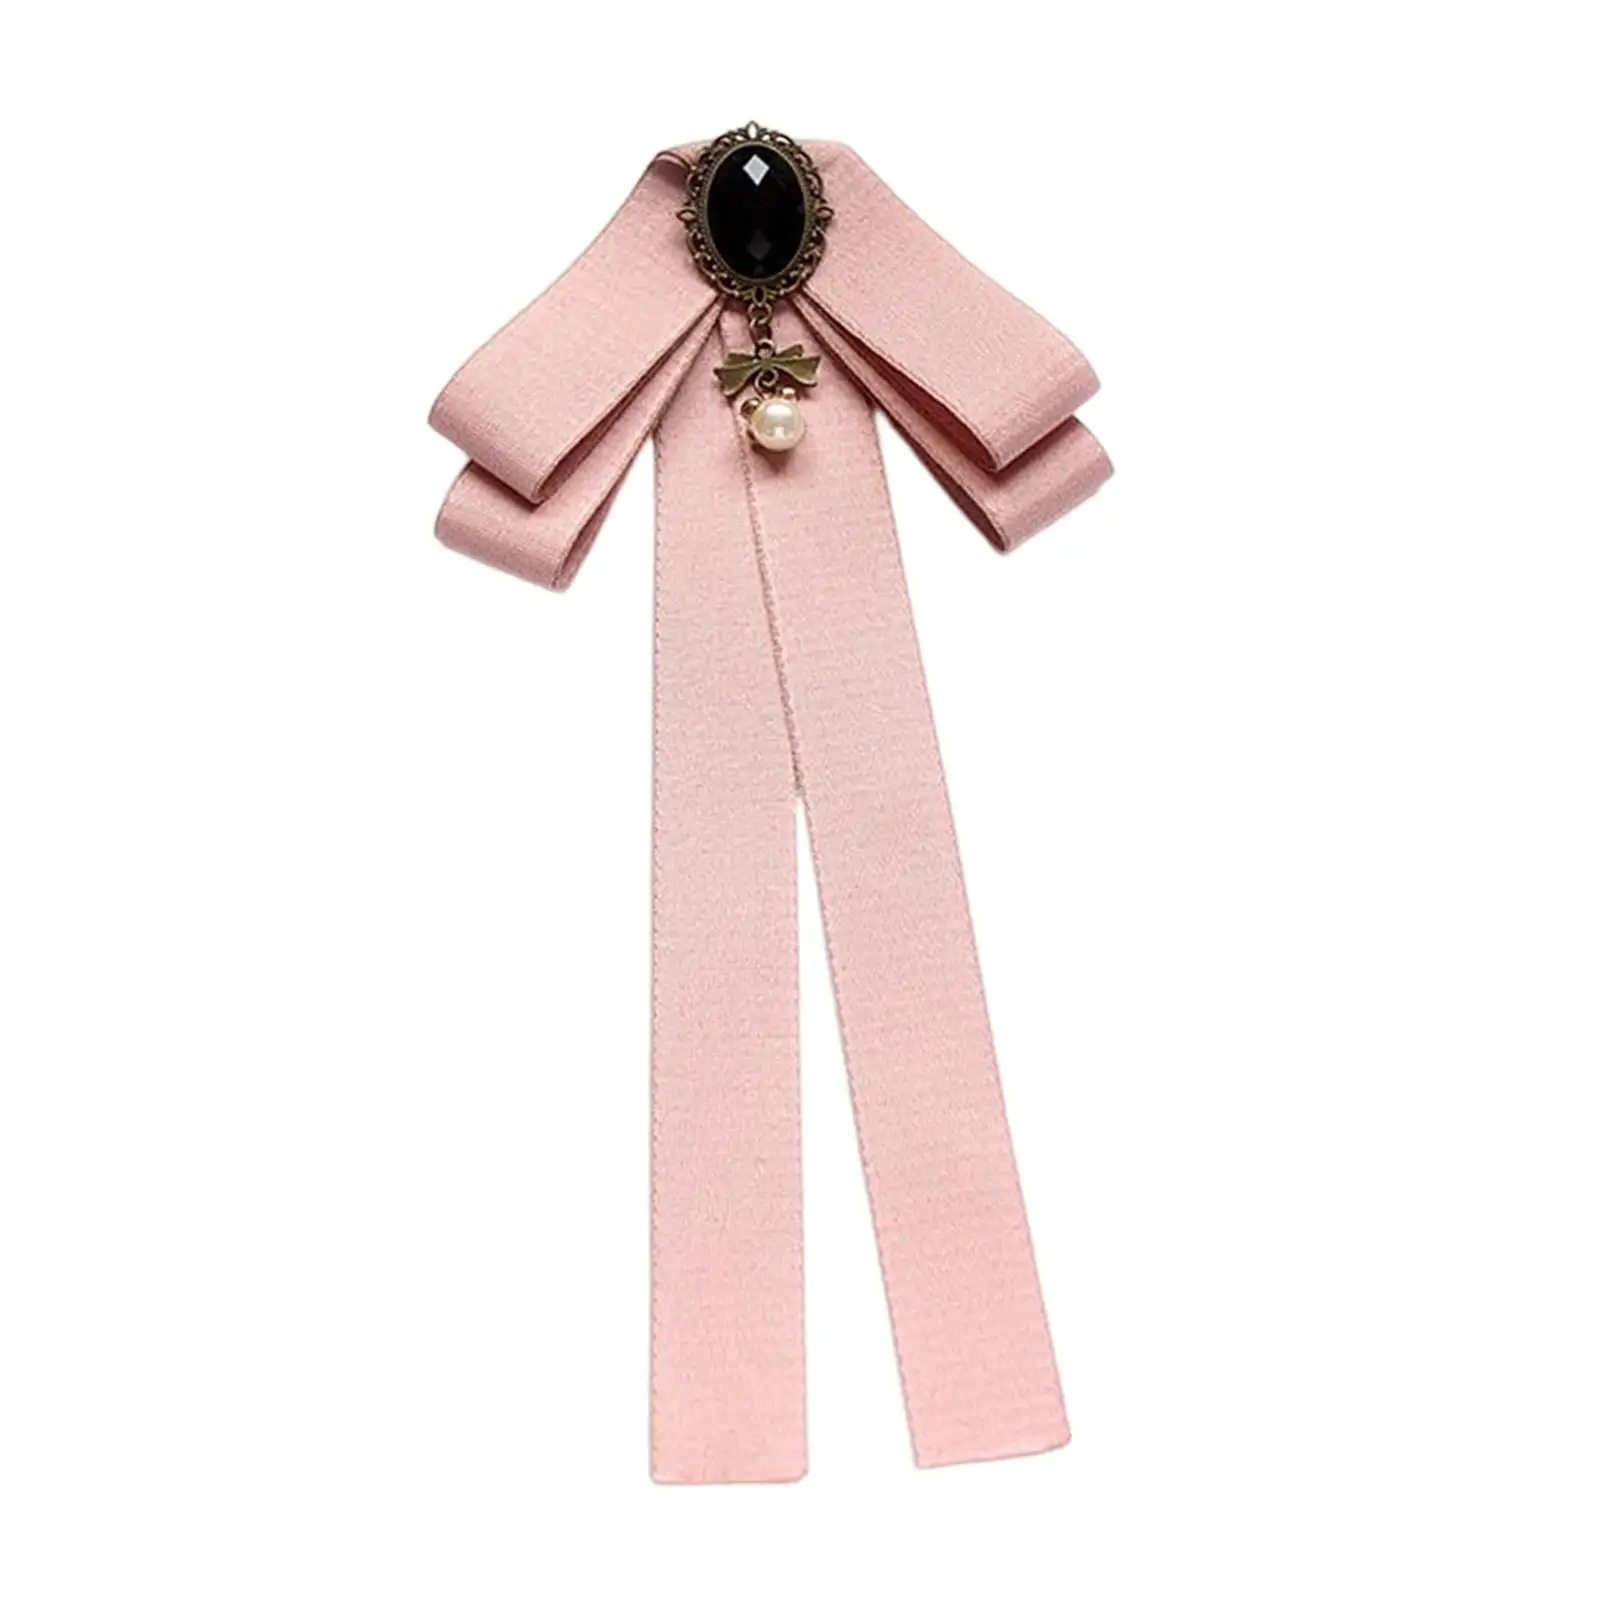 Ribbon Bow Tie Brooch Clothing Accessories Collar Bowknot Brooch Pin Neck Tie for Graduation Daily Use Cocktails Banquet Wedding